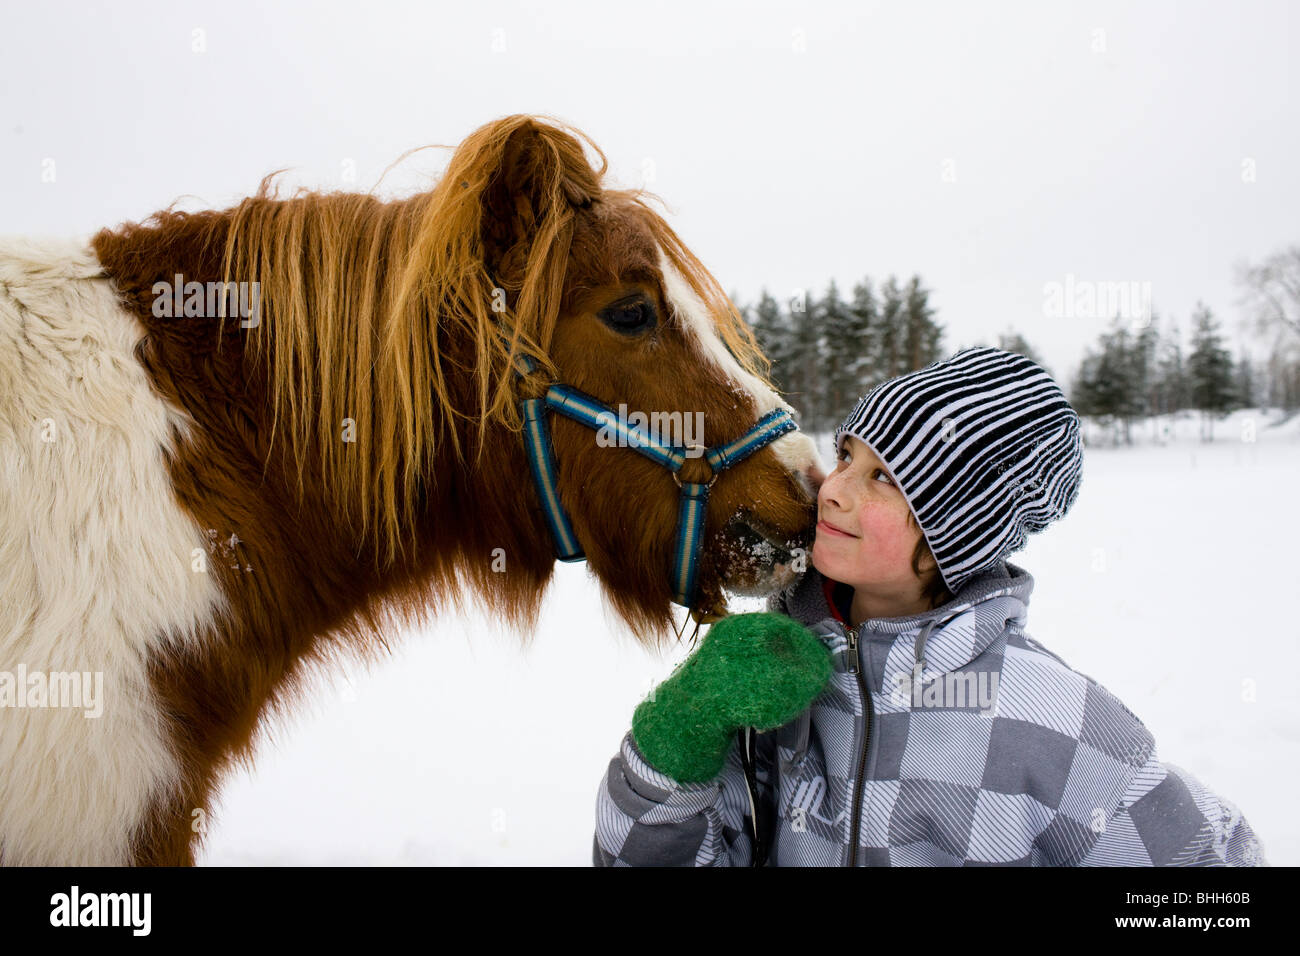 Boy with a horse, Sweden. Stock Photo